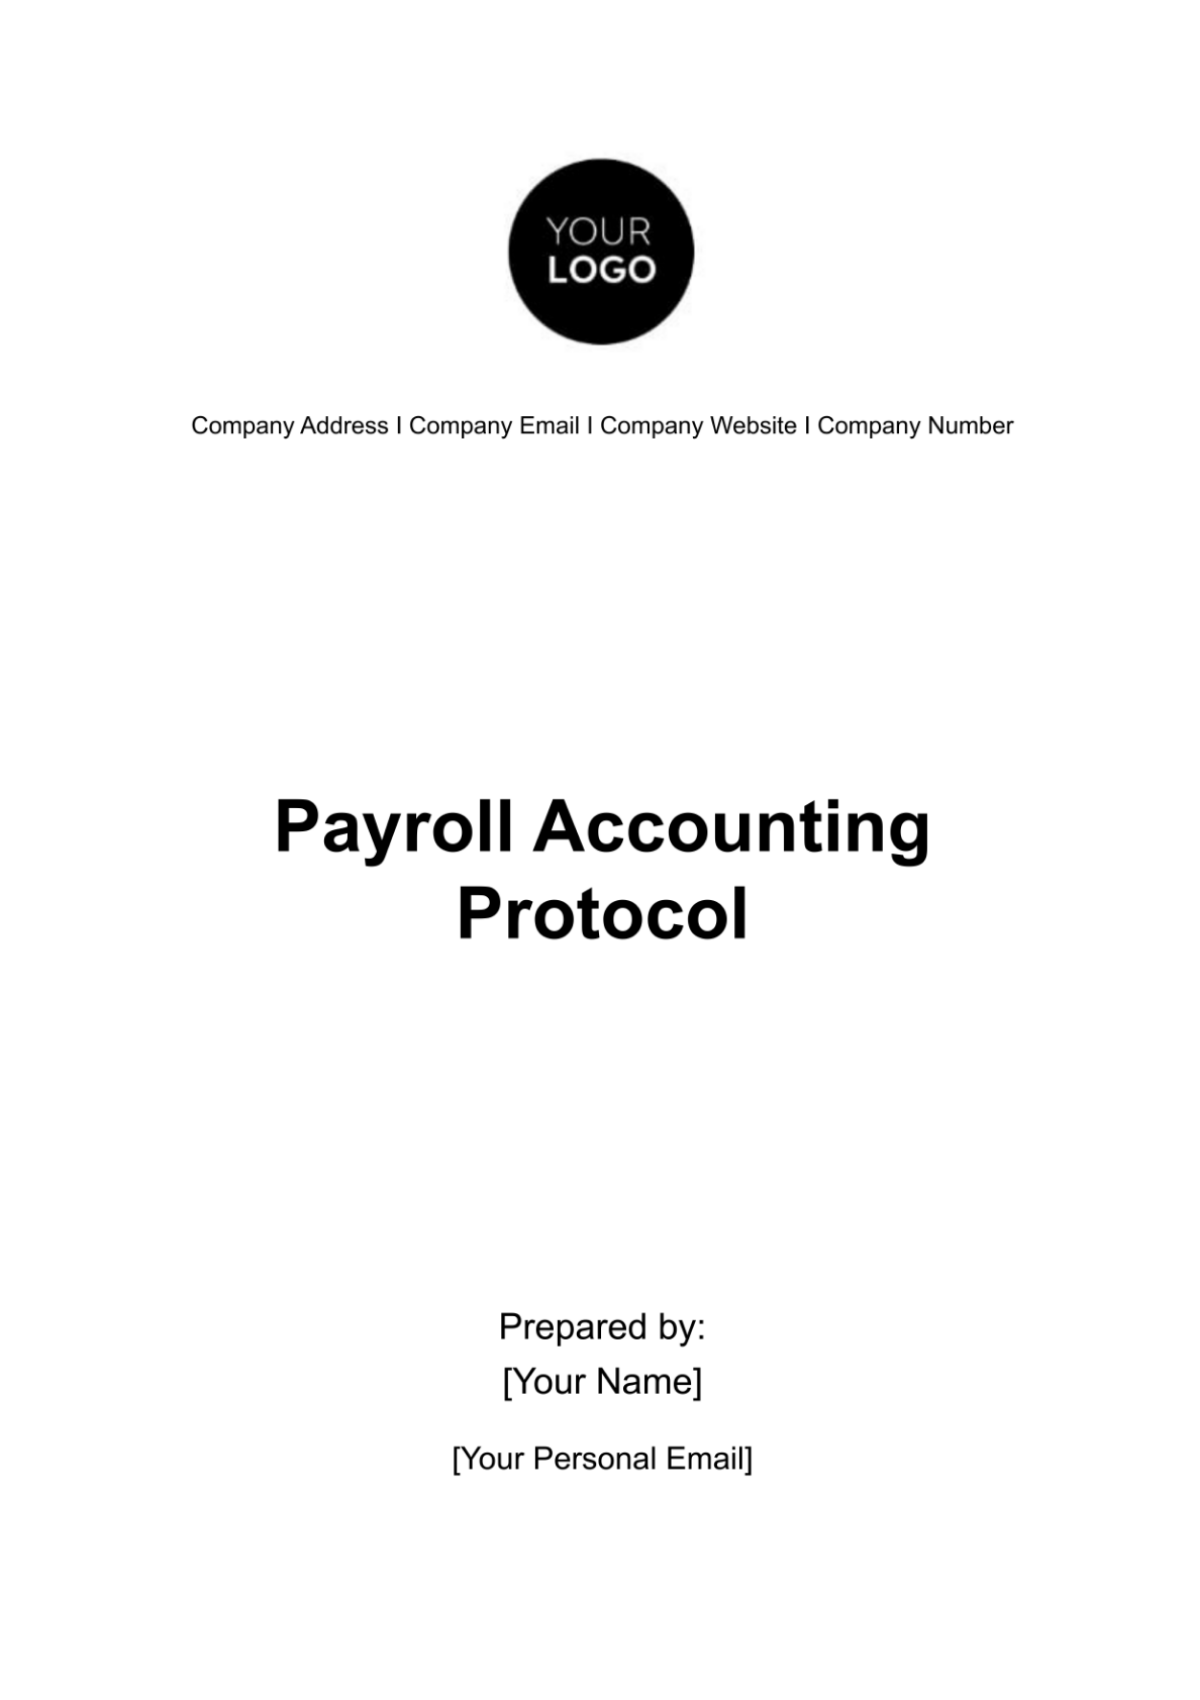 Payroll Accounting Protocol Template